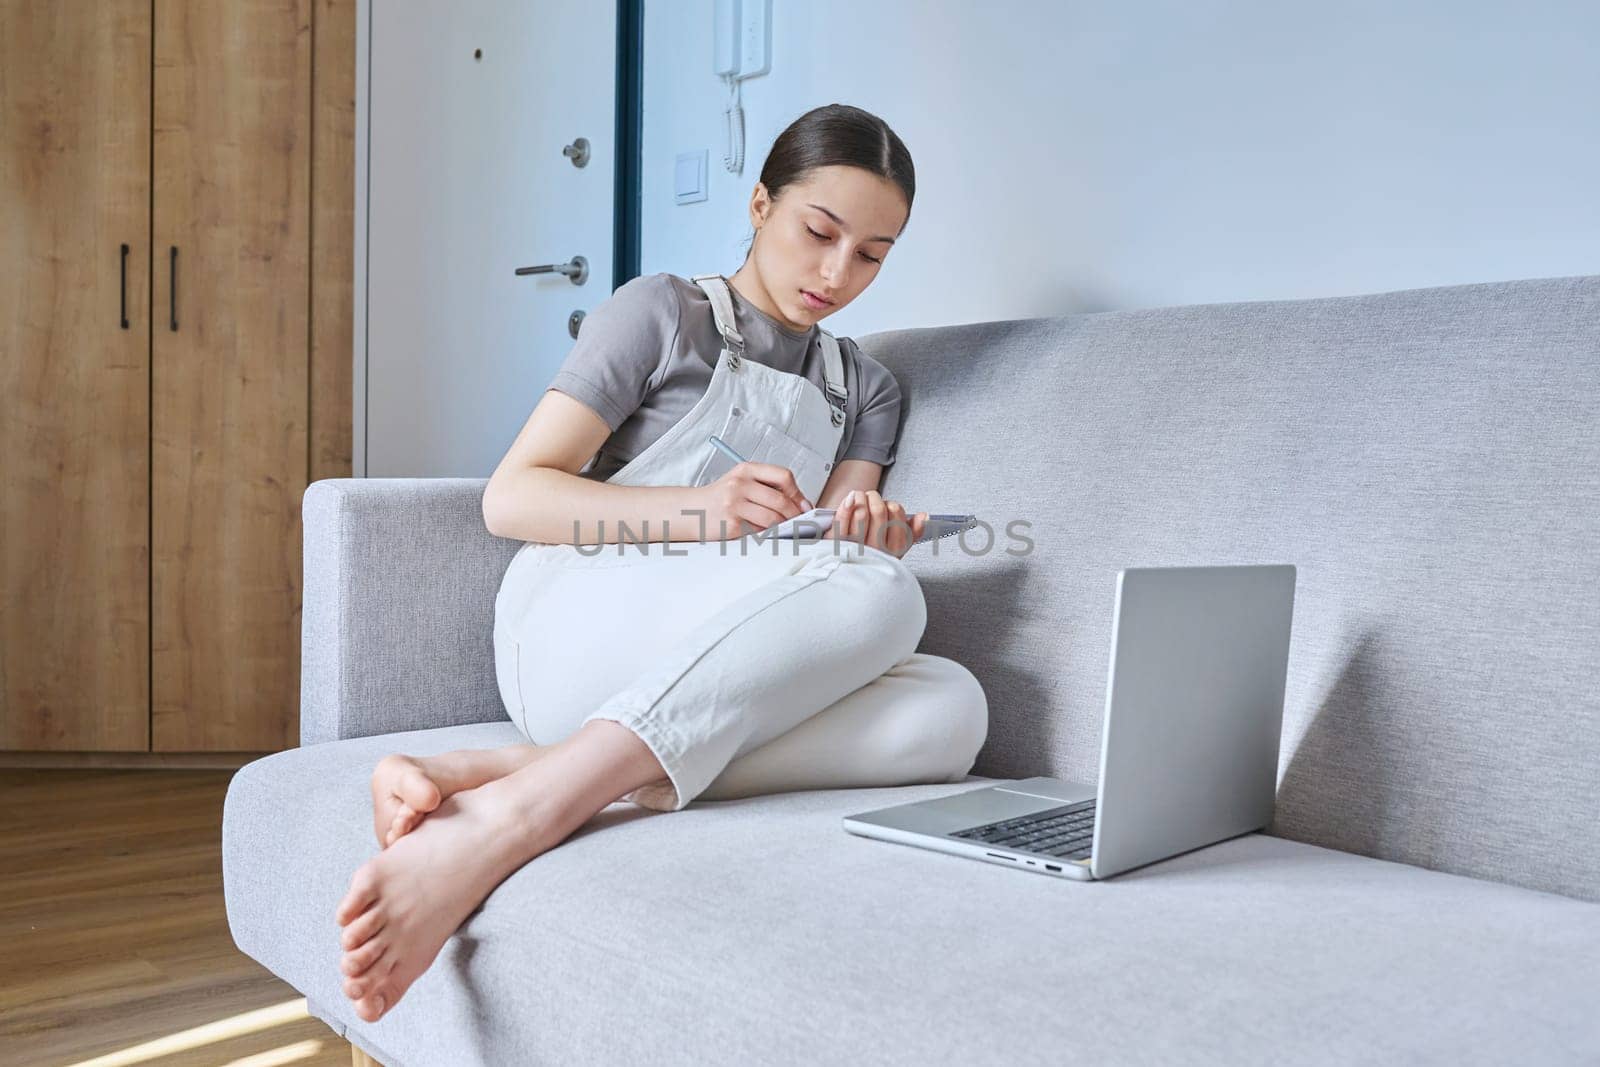 Teen girl at home sitting on couch using laptop, writing in notebook. Technology for learning leisure communication, modern lifestyle, adolescence concept